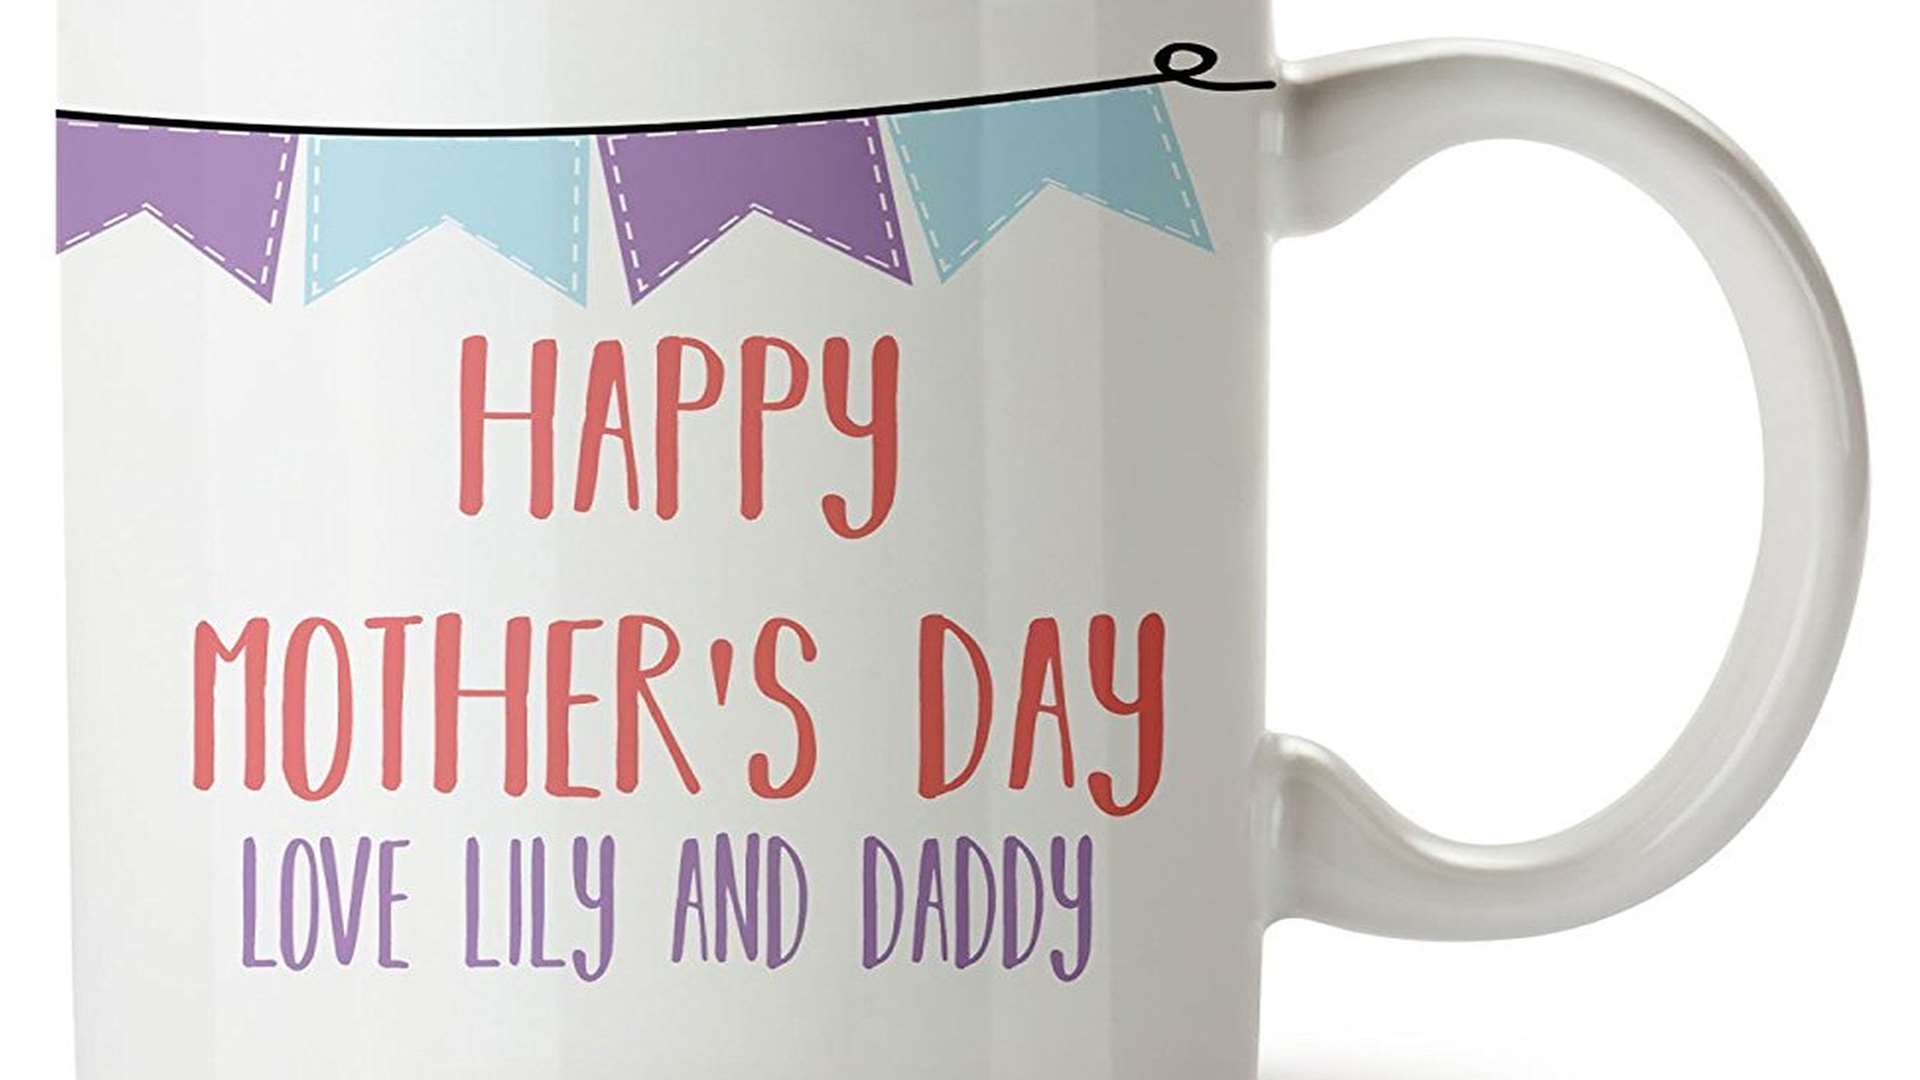 Make your mum a cuppa this Mother's Day with this special mug